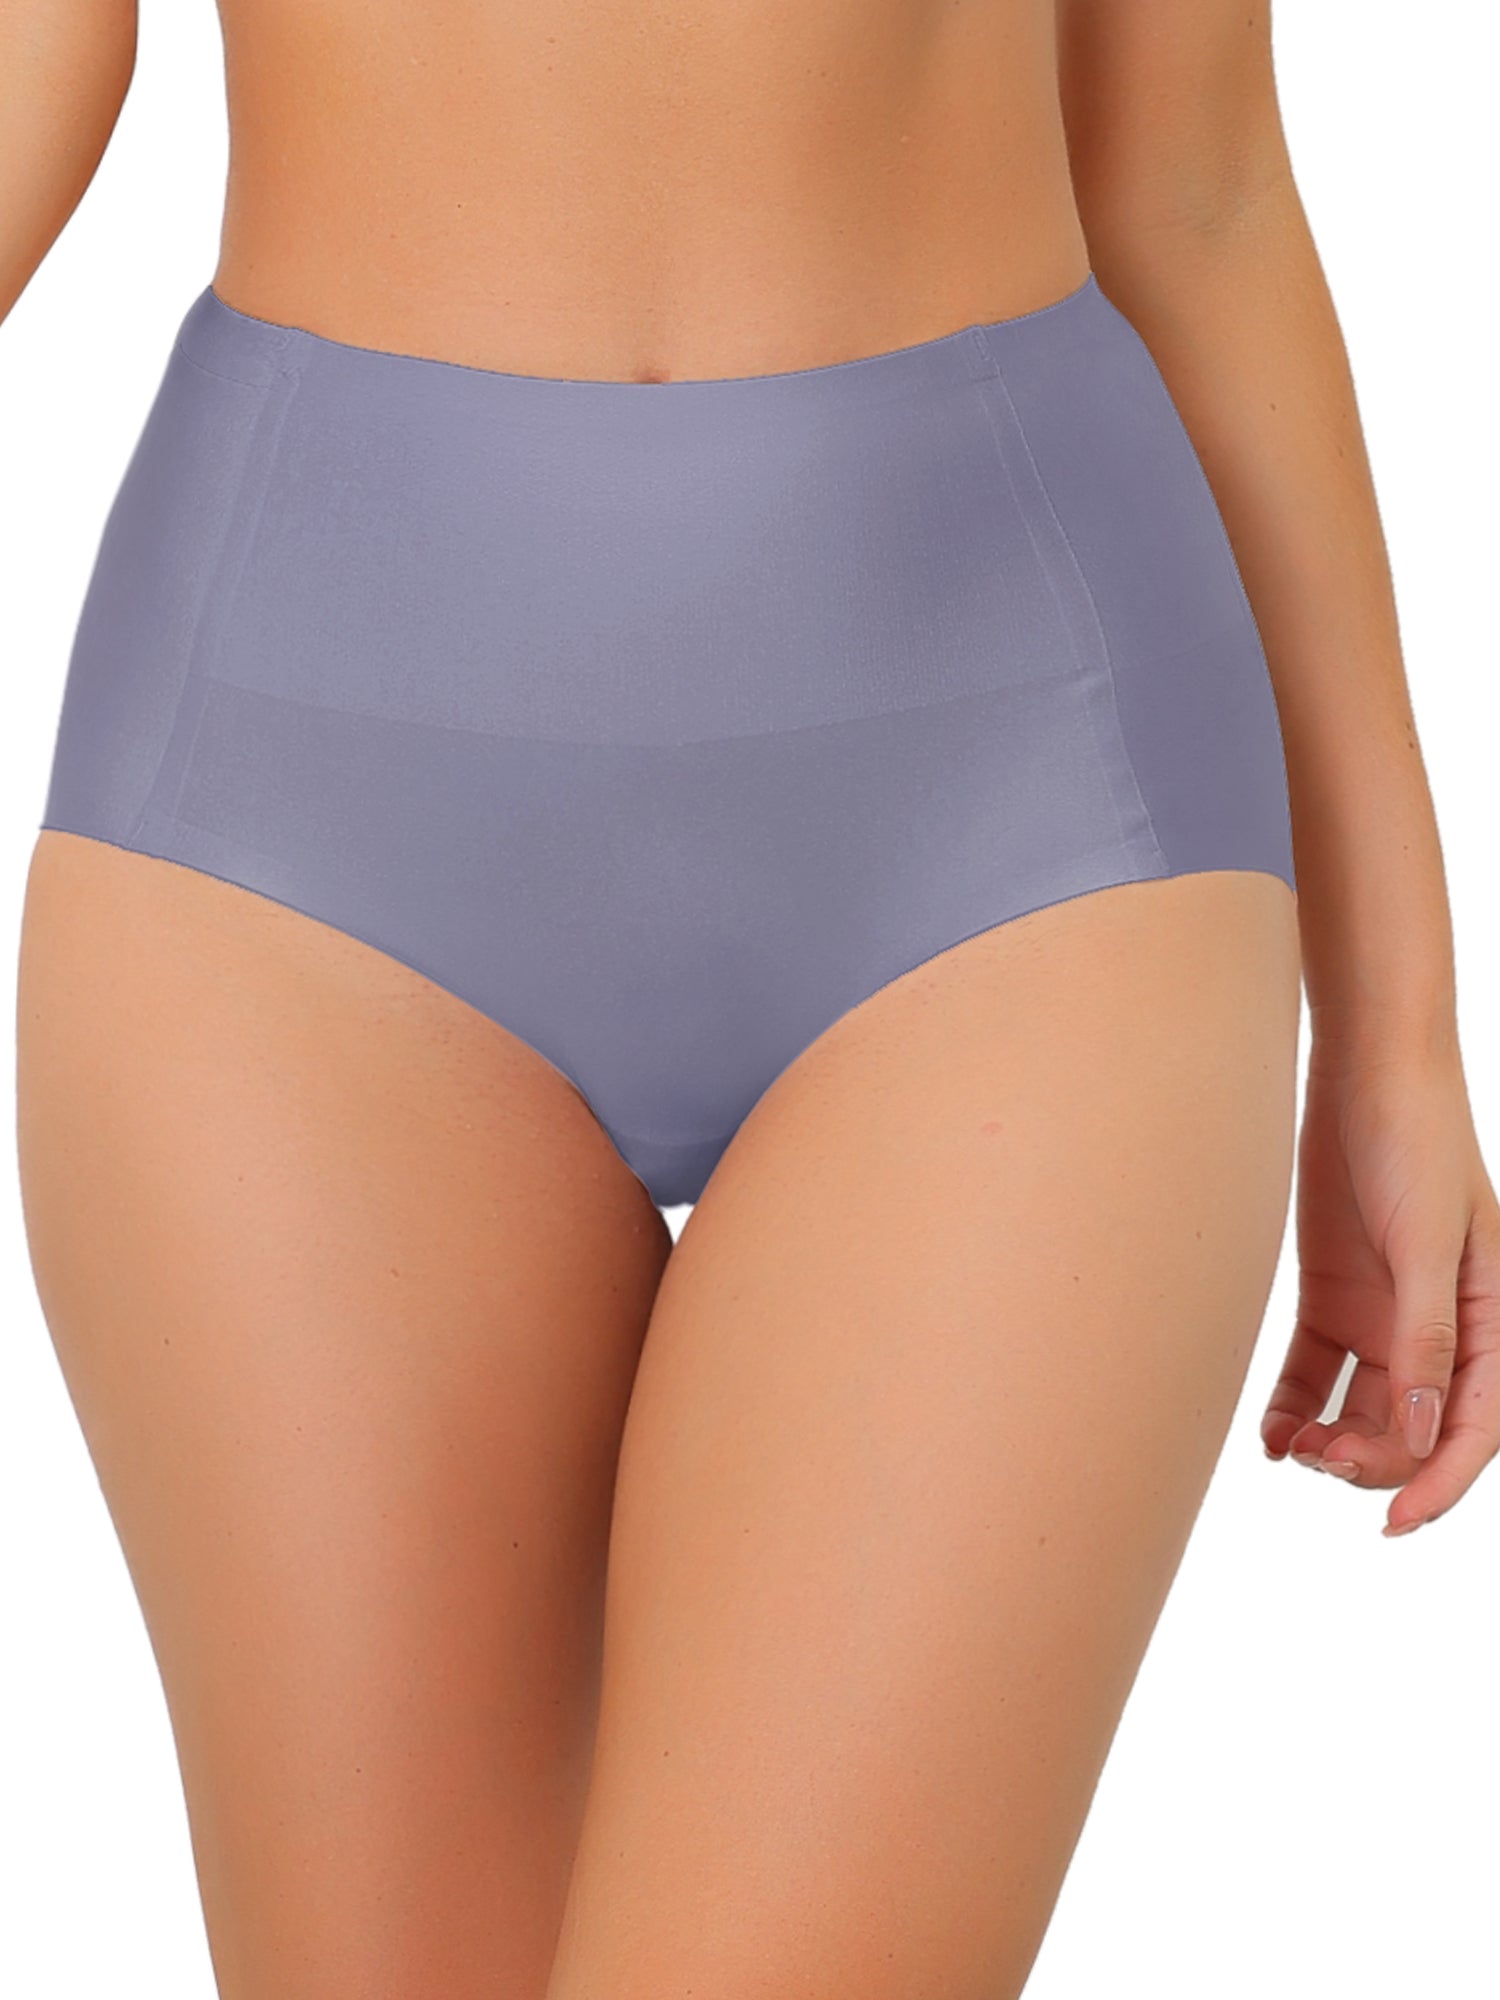 Allegra K Women's Unlined No-Show Comfortable Available in Plus Size Thongs  Purple XX-Large